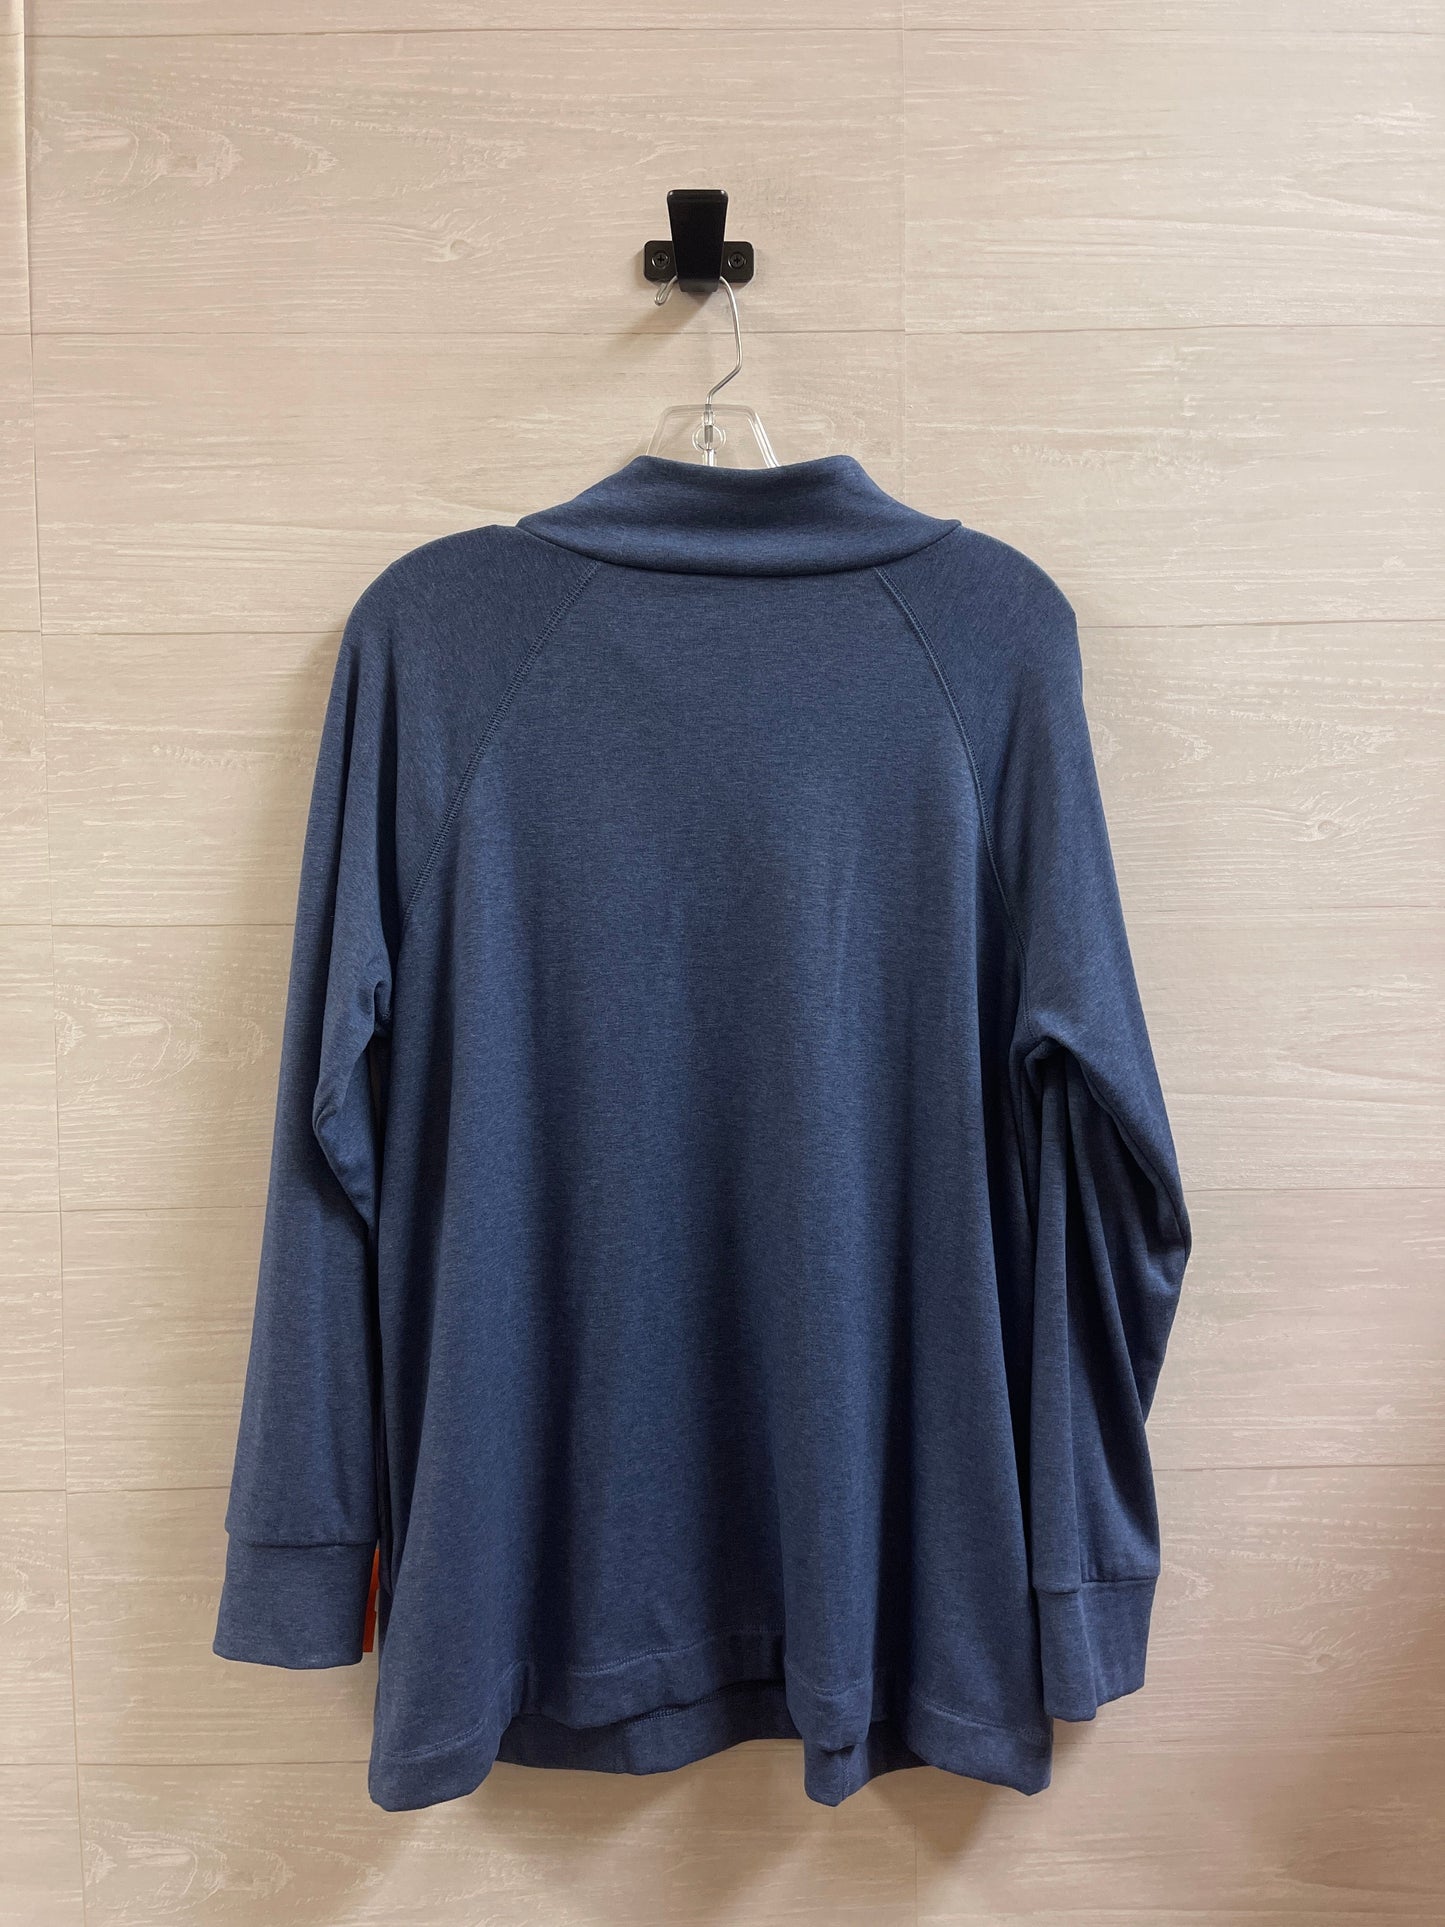 Top Long Sleeve By Susan Graver  Size: M